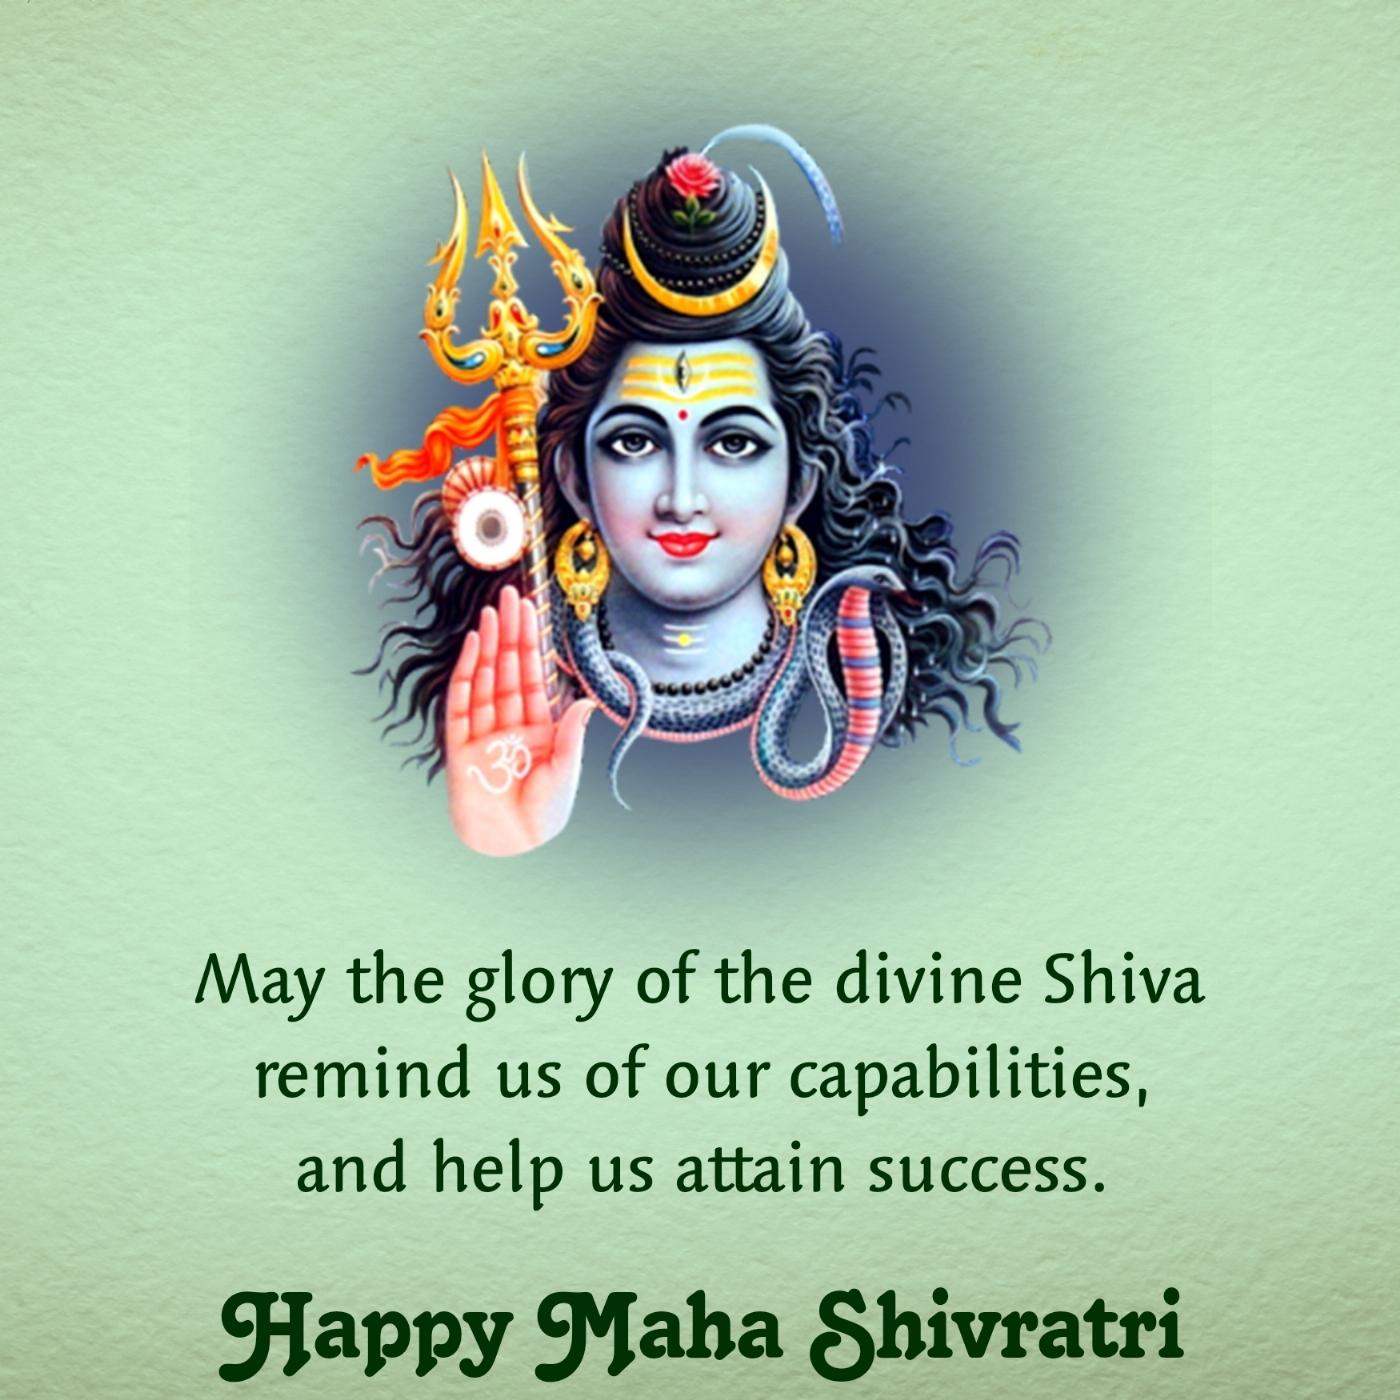 May the glory of the divine Shiva remind us of our capabilities